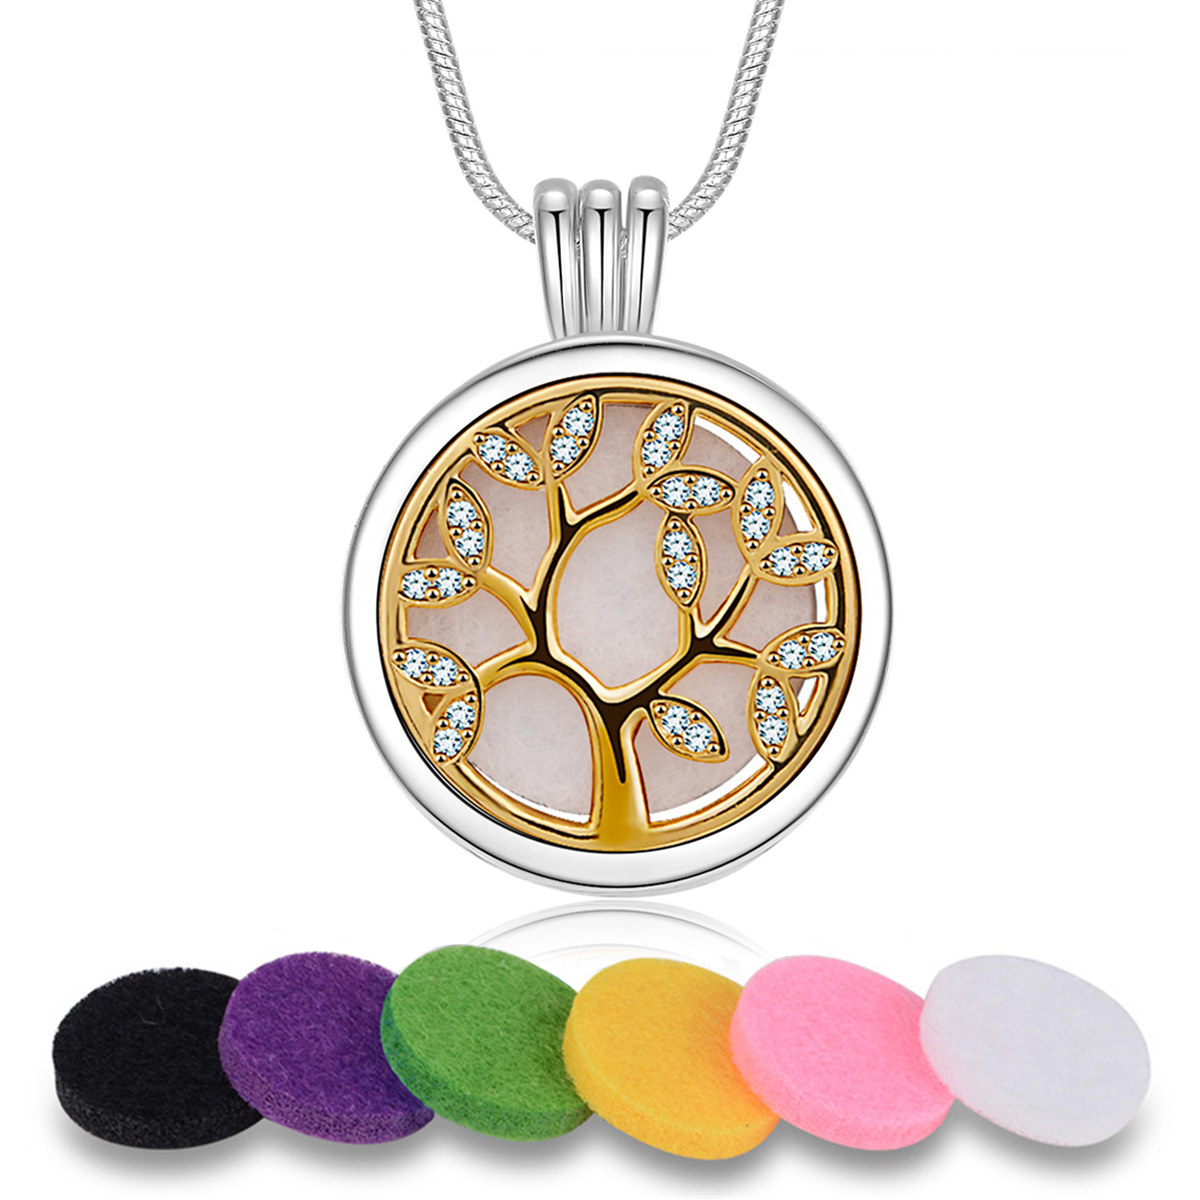 Merryshine Jewelry Copper Plating Silver Flat Hollow Life Tree Design Aromatherapy Essential Oil Necklace Diffuser